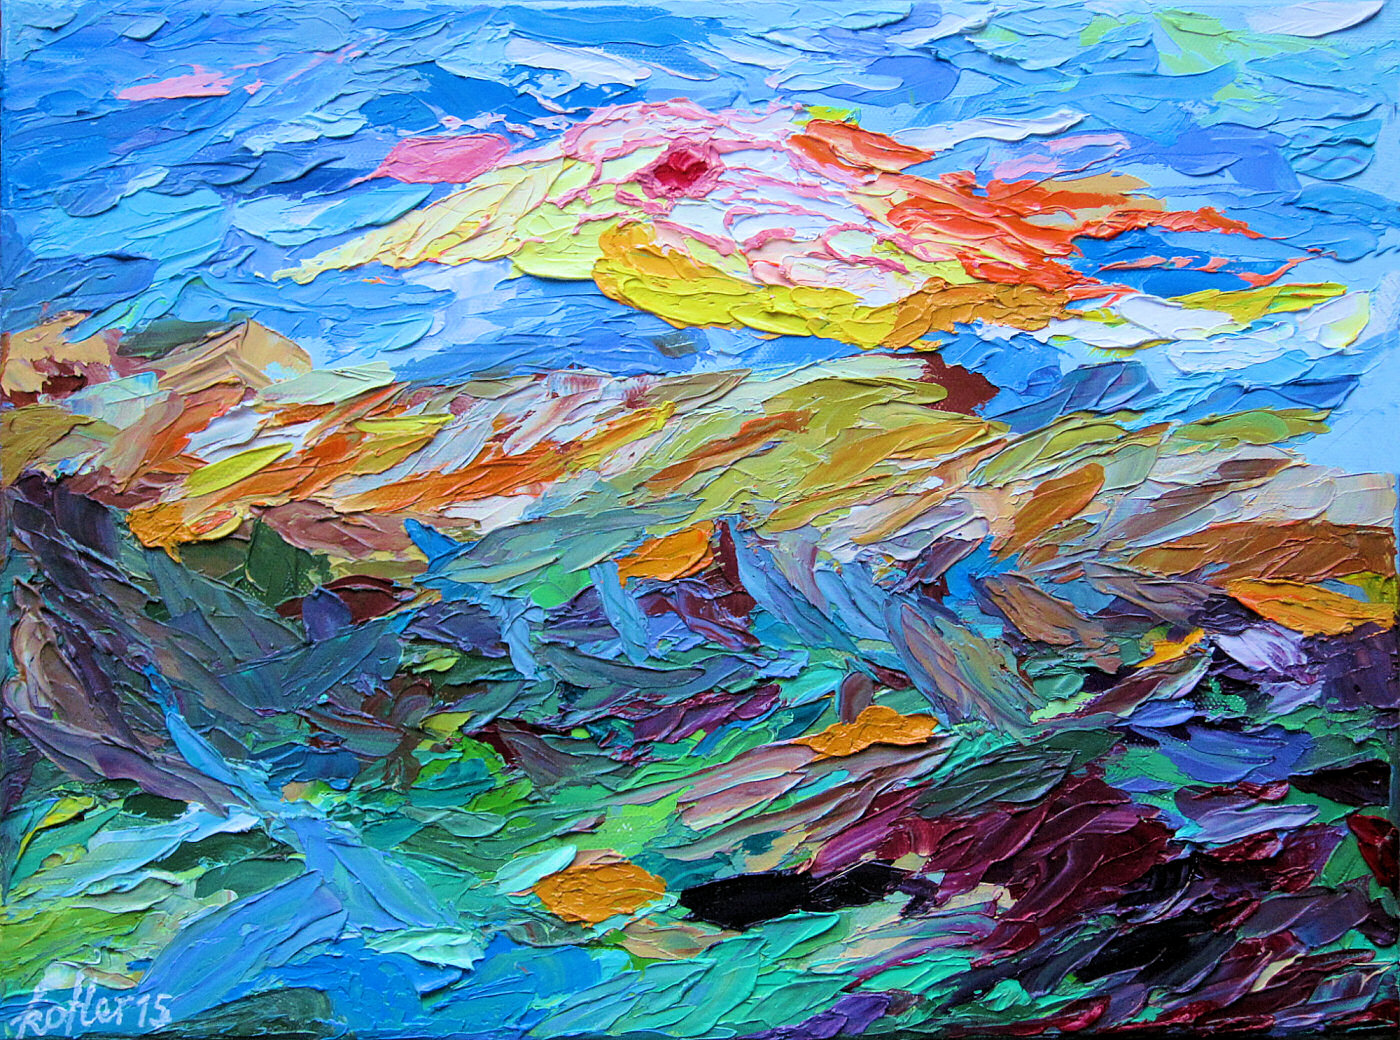 Painting: Weather is Changing